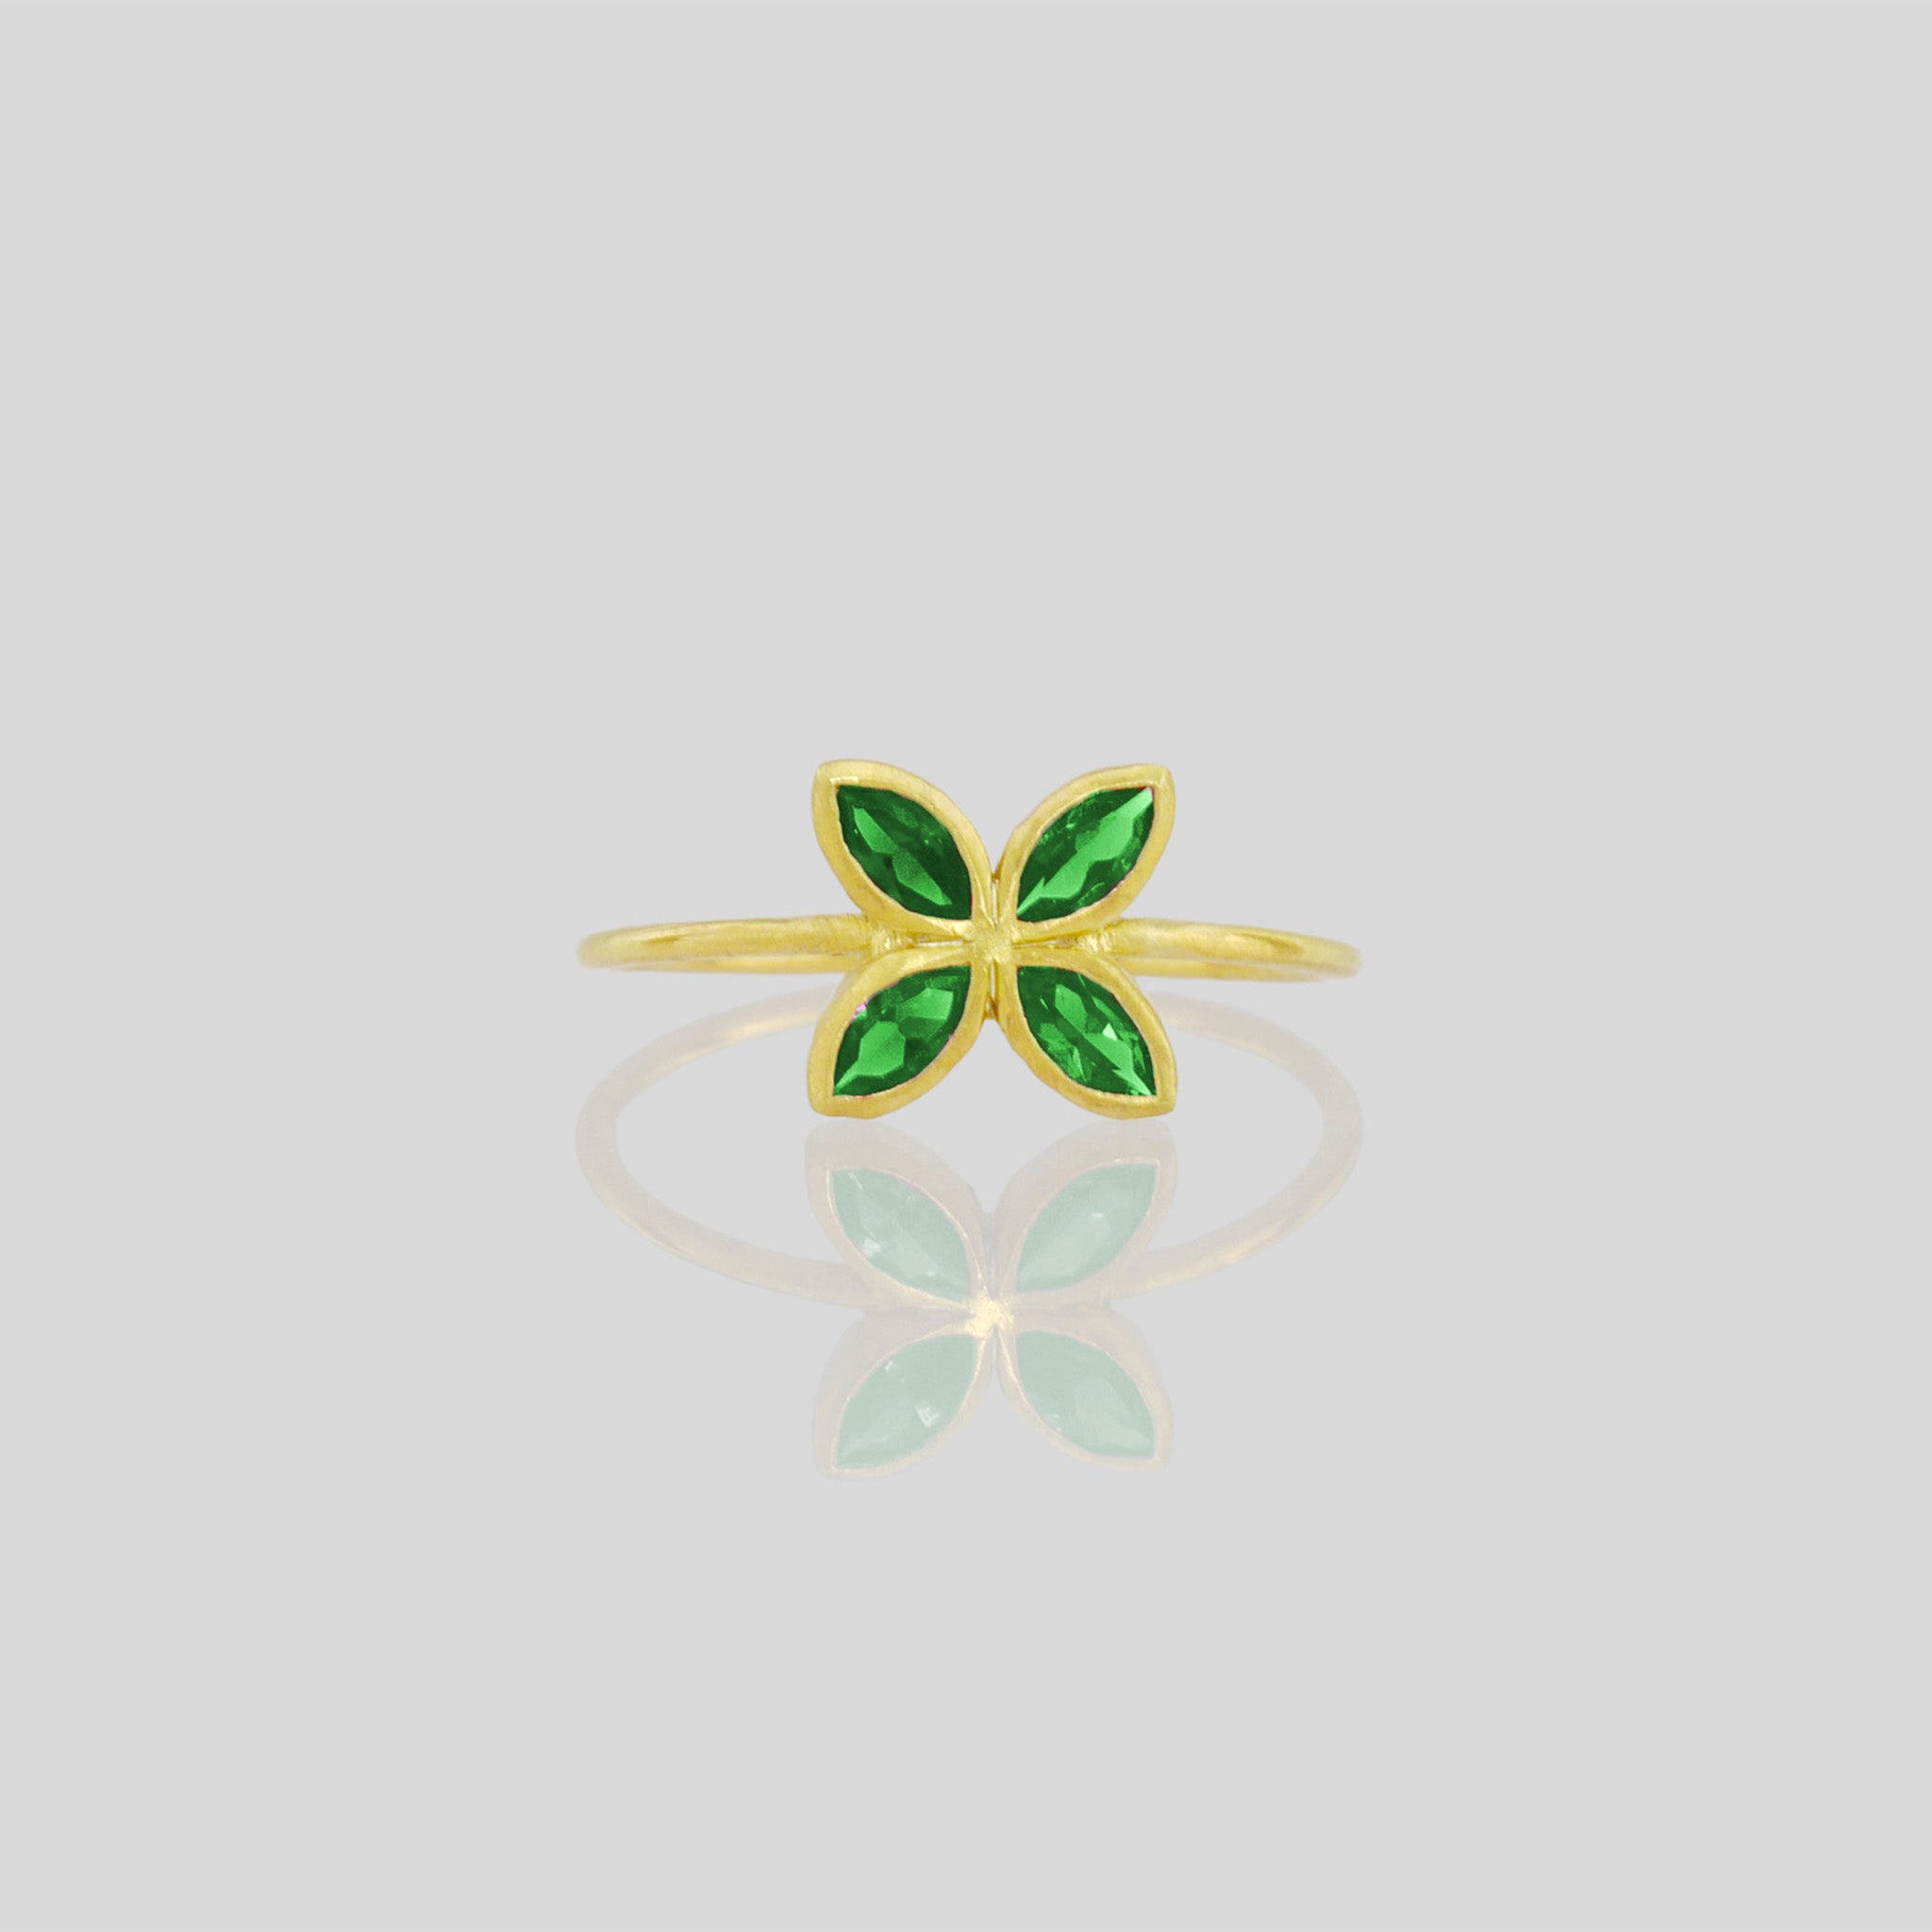 Front view of Delicate Gold ring with Emerald marquee in a flower-shaped design. Radiant and cheerful addition to any collection.